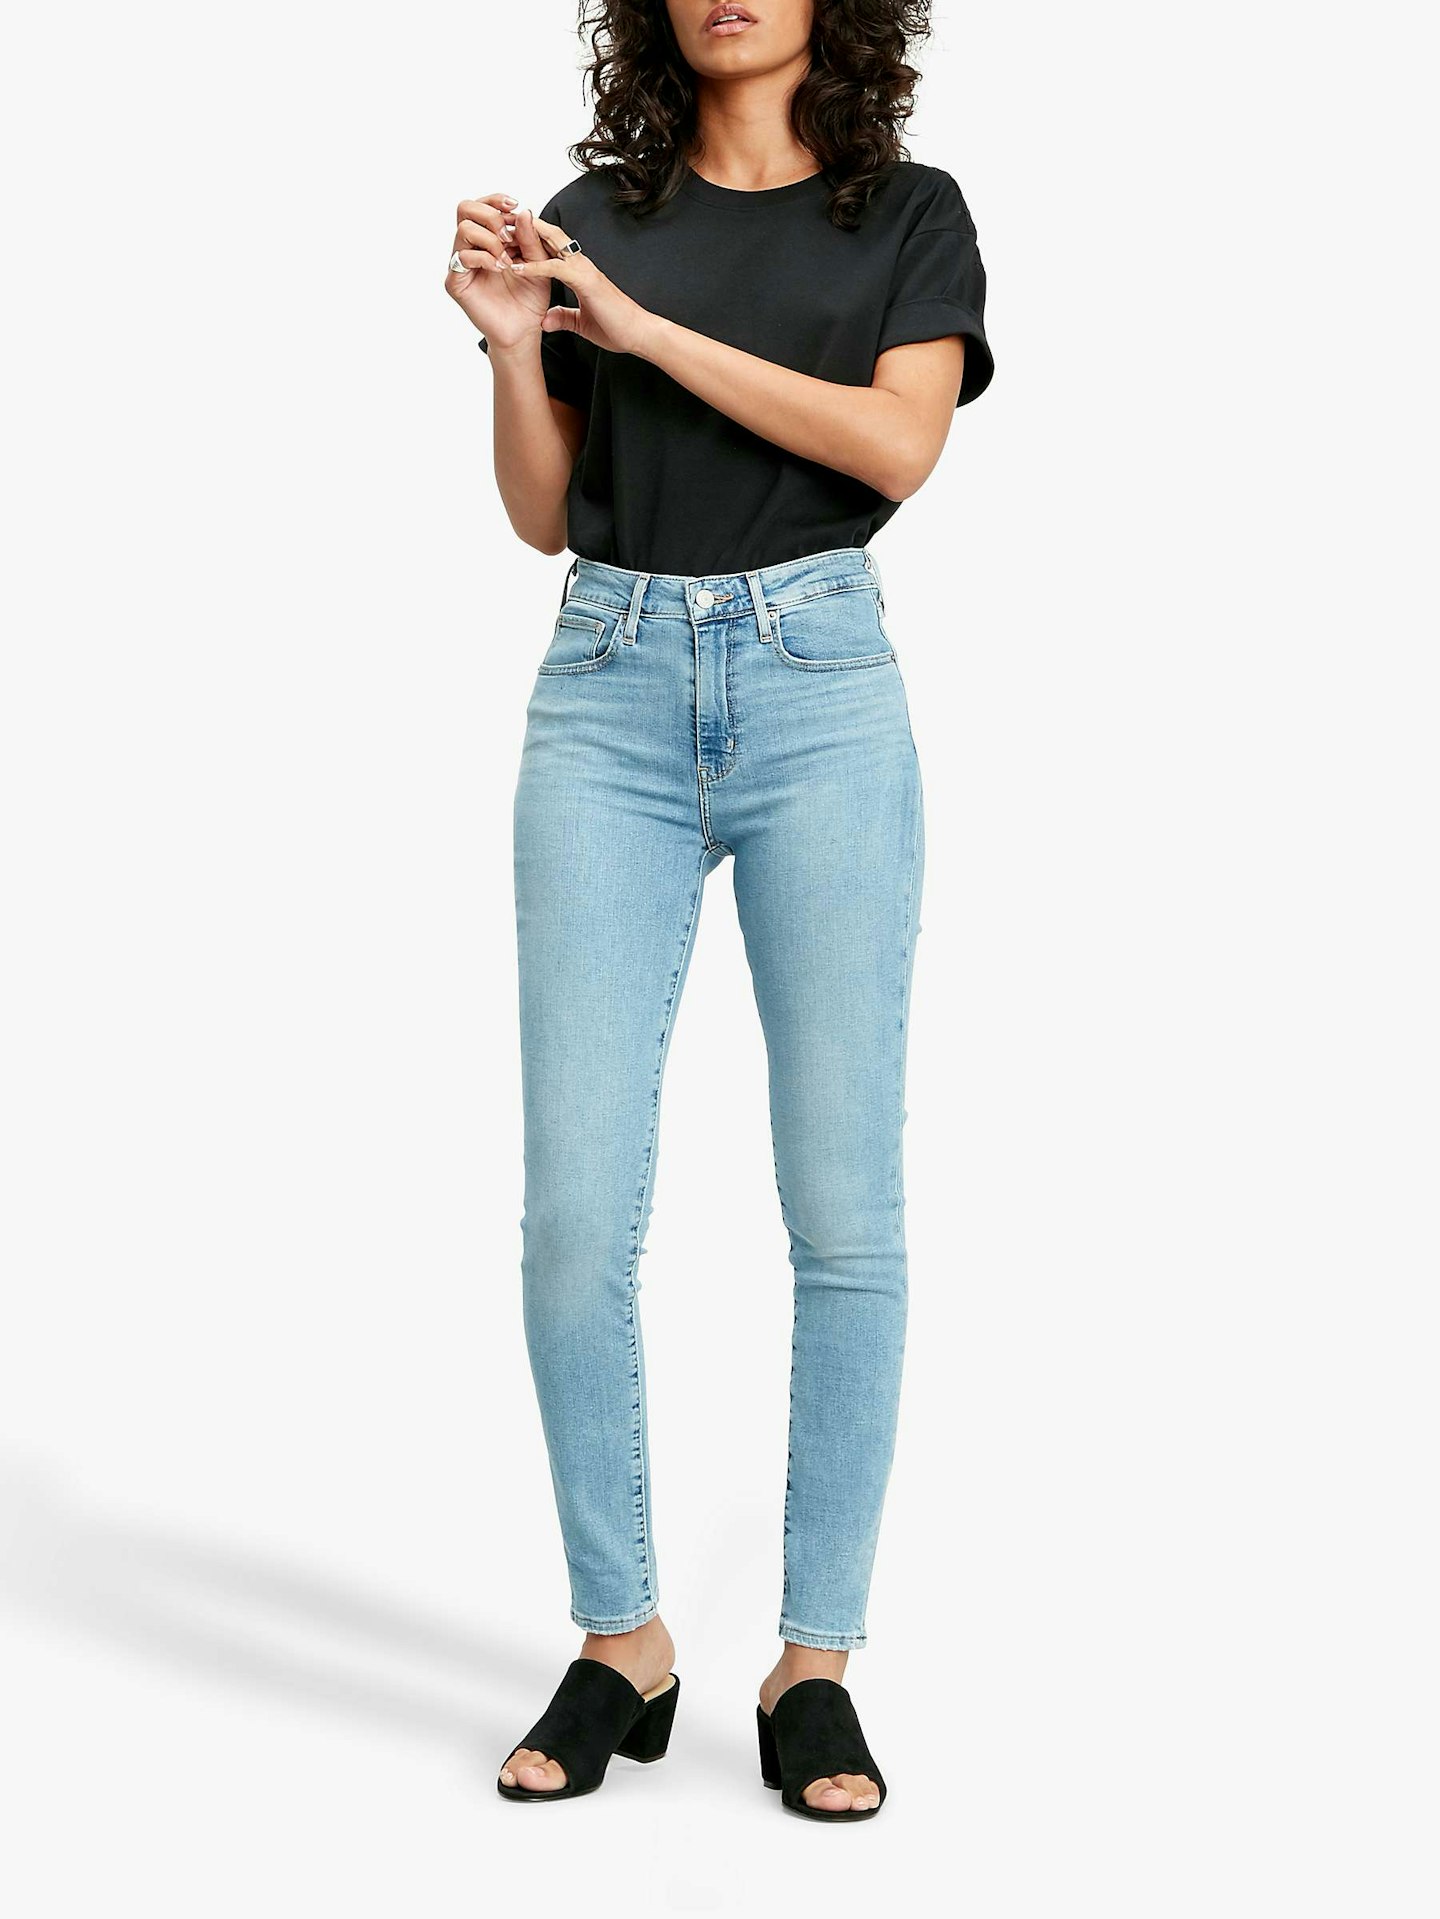 Leviu0026#039;s 721 High Rise Skinny Jeans, Have A Nice Day